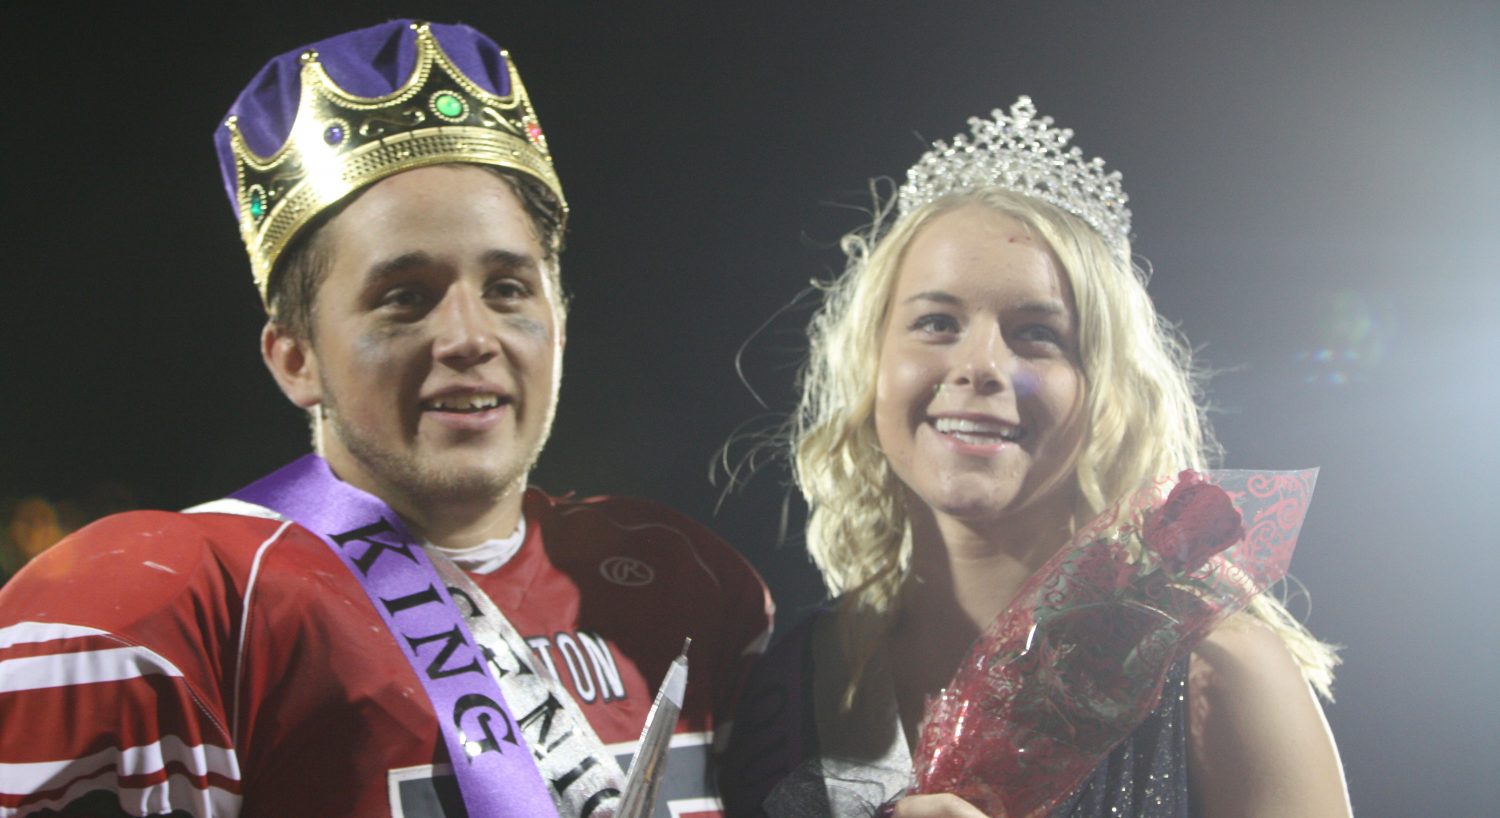 Lucas Halferty and Caiden Rexius smile as they celebrate their homecoming coronation. (Photo by 